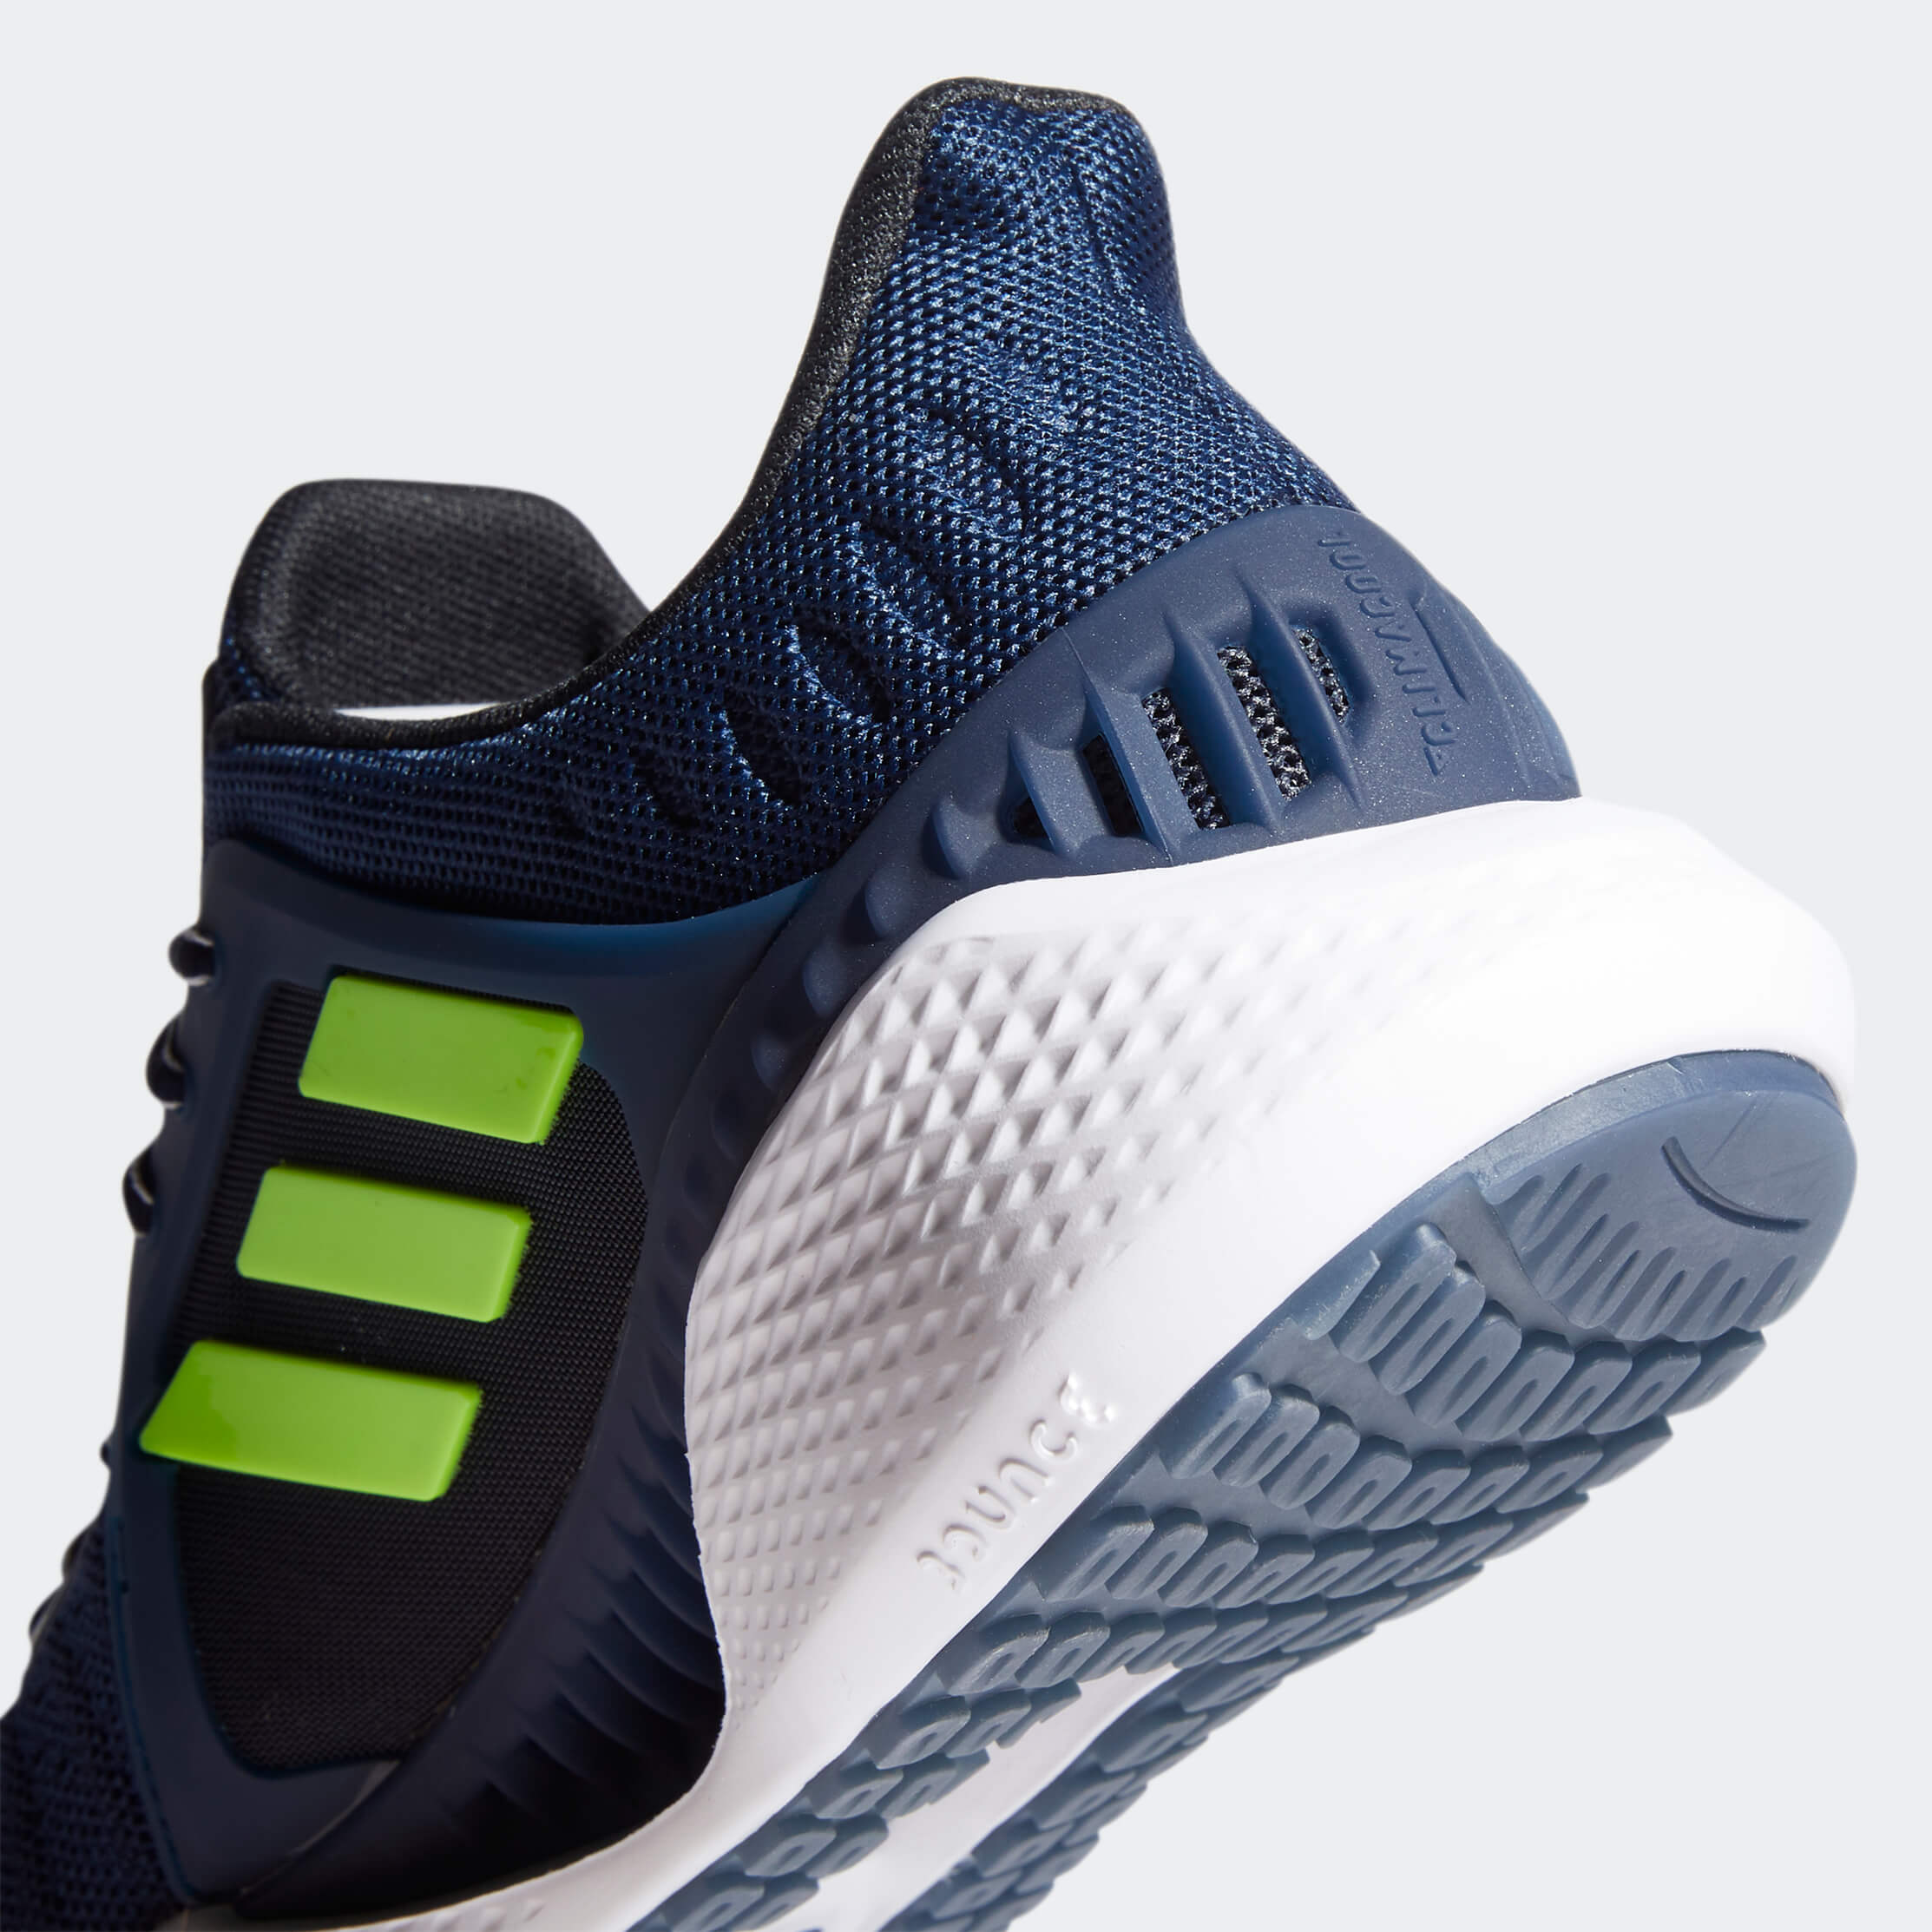 climacool 6